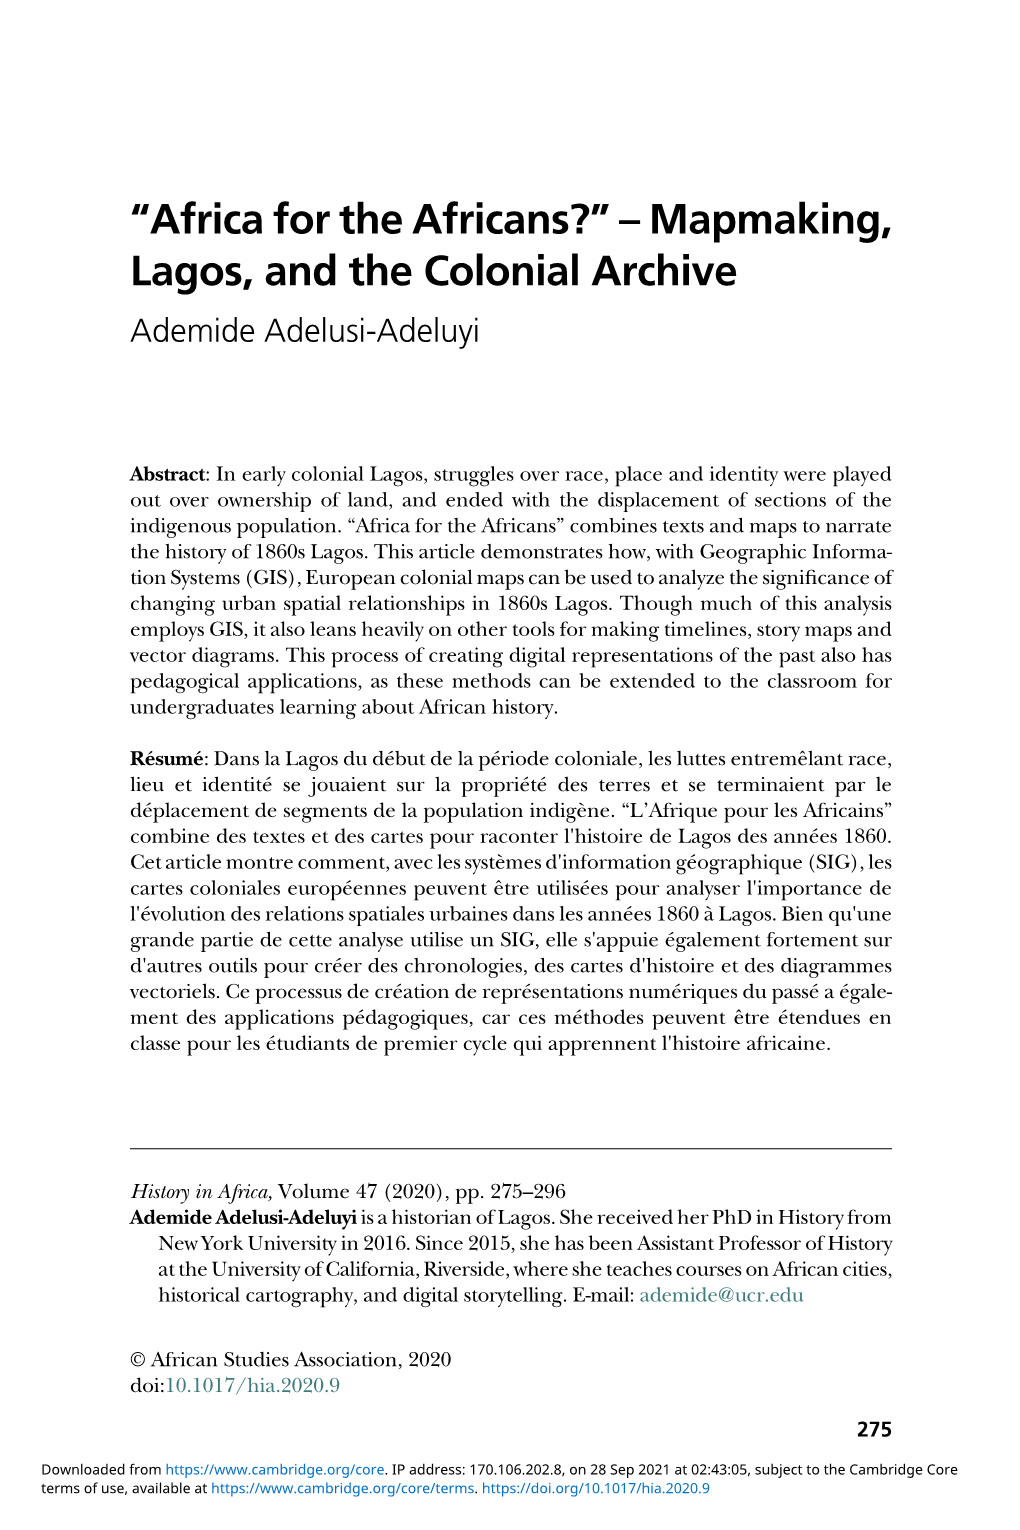 “Africa for the Africans?” – Mapmaking, Lagos, and the Colonial Archive